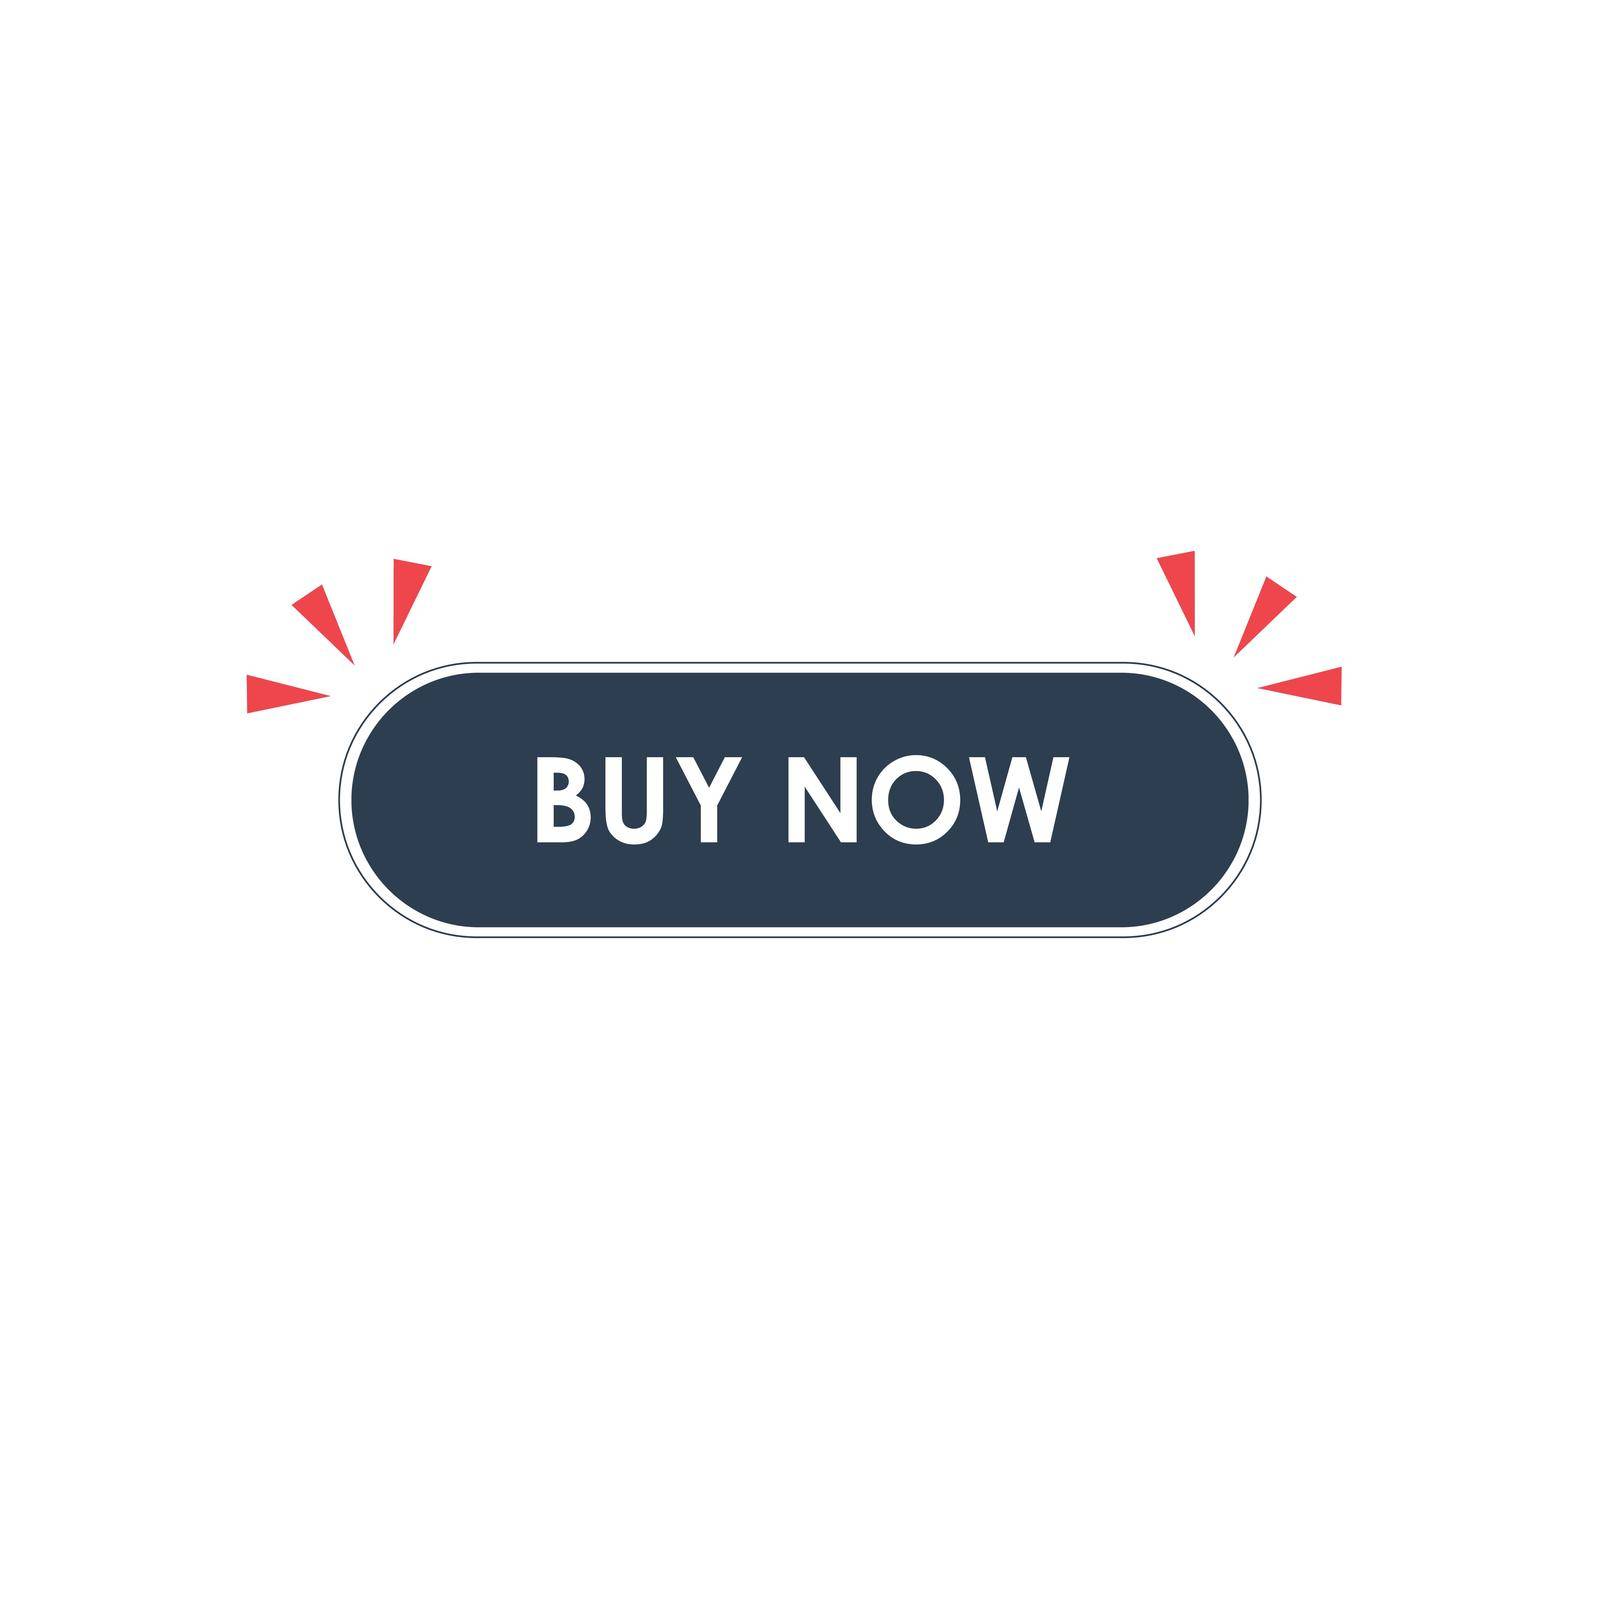 Buy Now round button. Shopping online Stock Vector illustration isolated